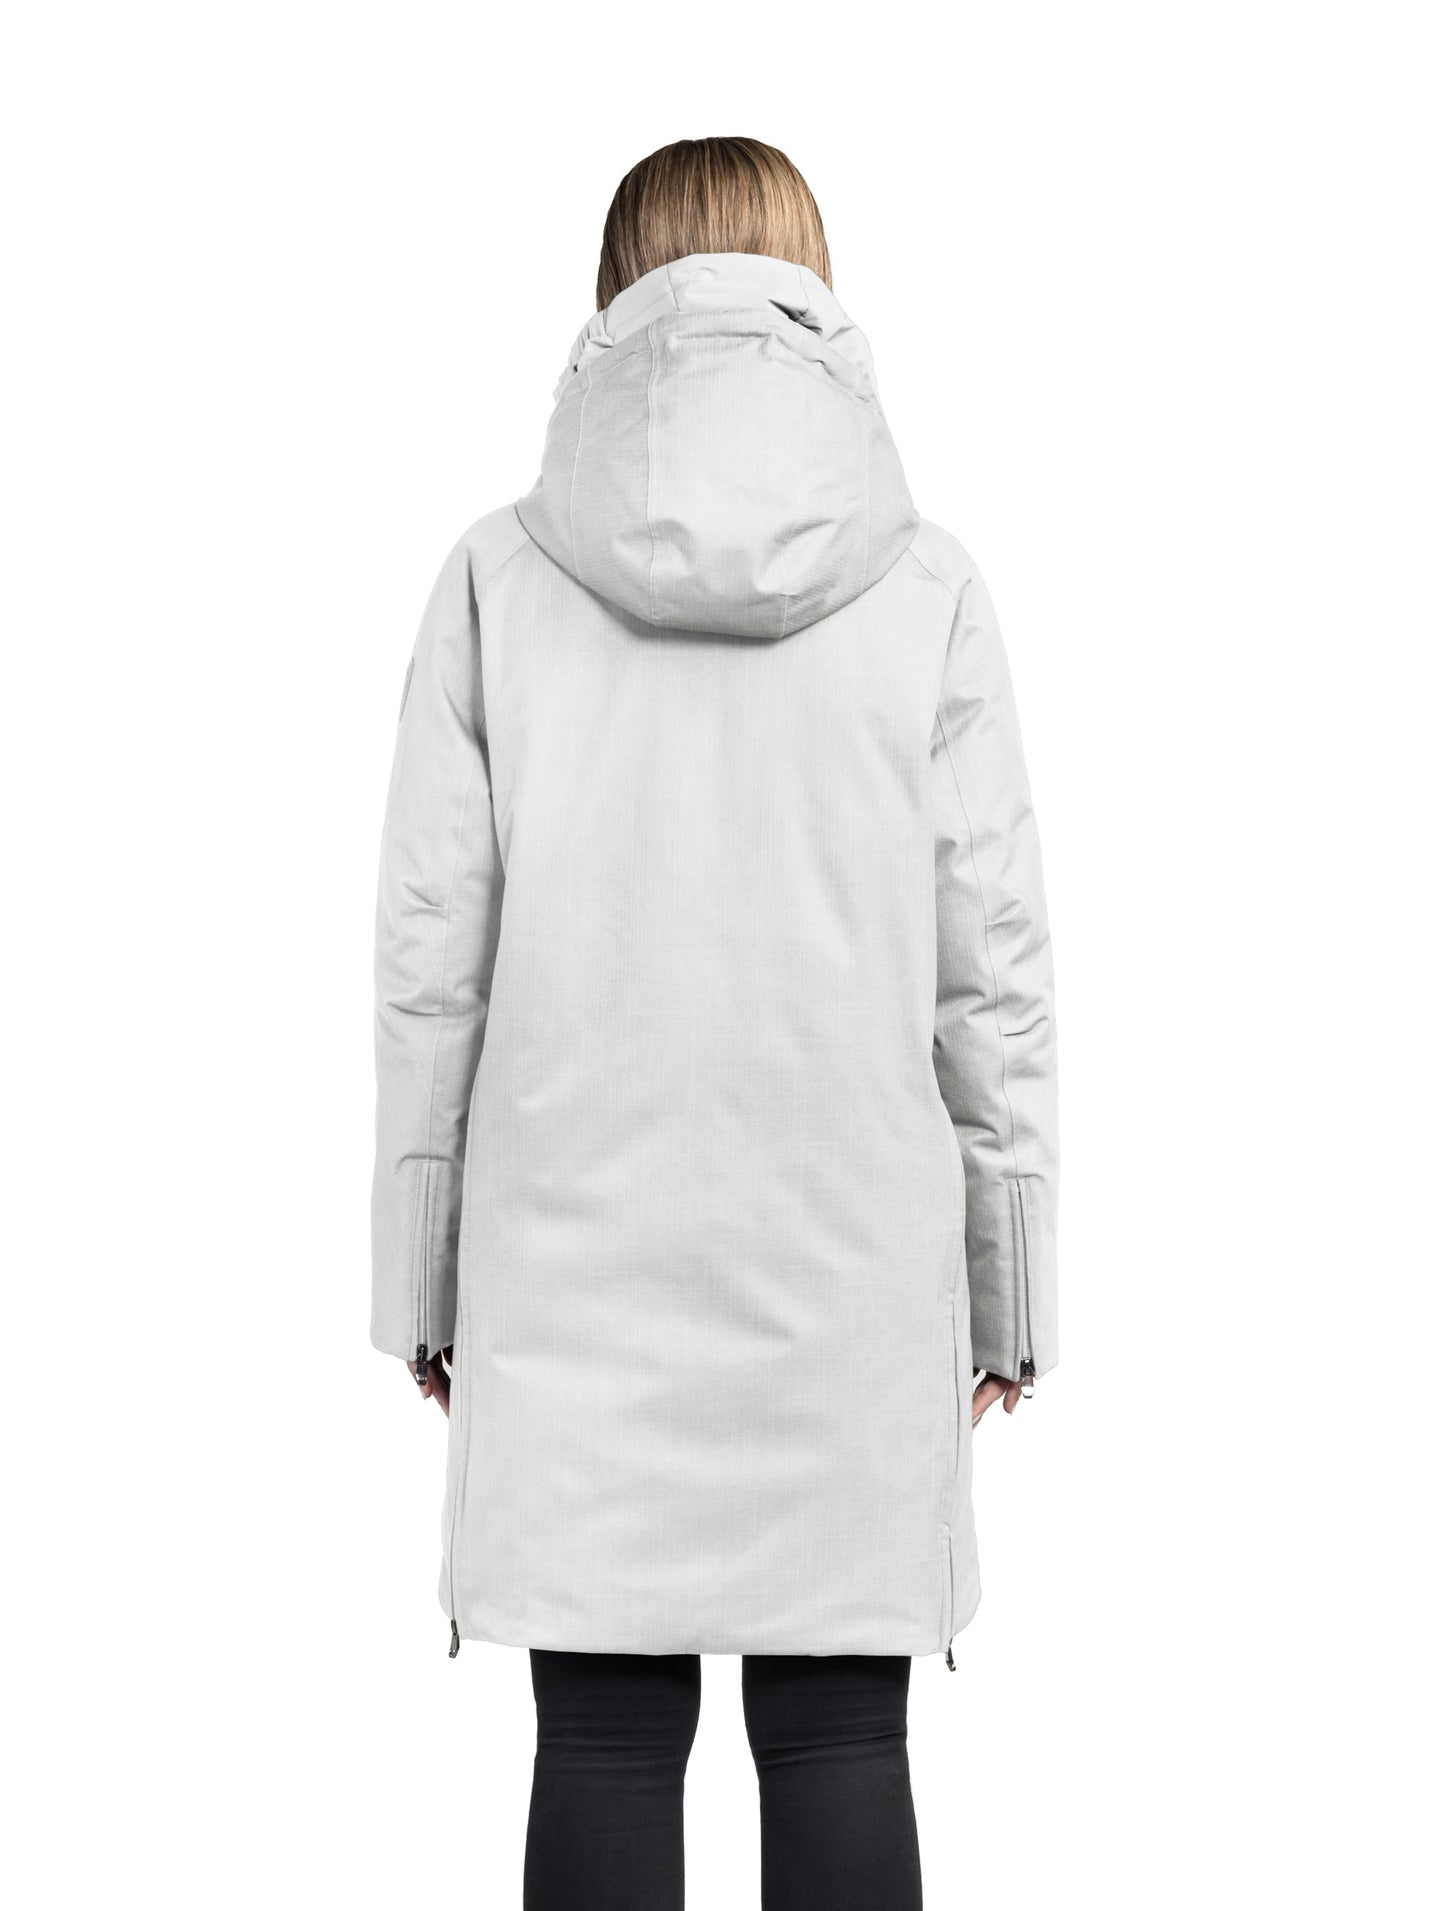 Dory Women's Tailored Back Zip Parka in knee length, premium Crosshatch fabrication, Premium Canadian White Duck Down insulation, non-removable down-filled hood, removable interior hood, centre front two-way zipper with wind flap, vertical zipper detailing along back, in Concrete